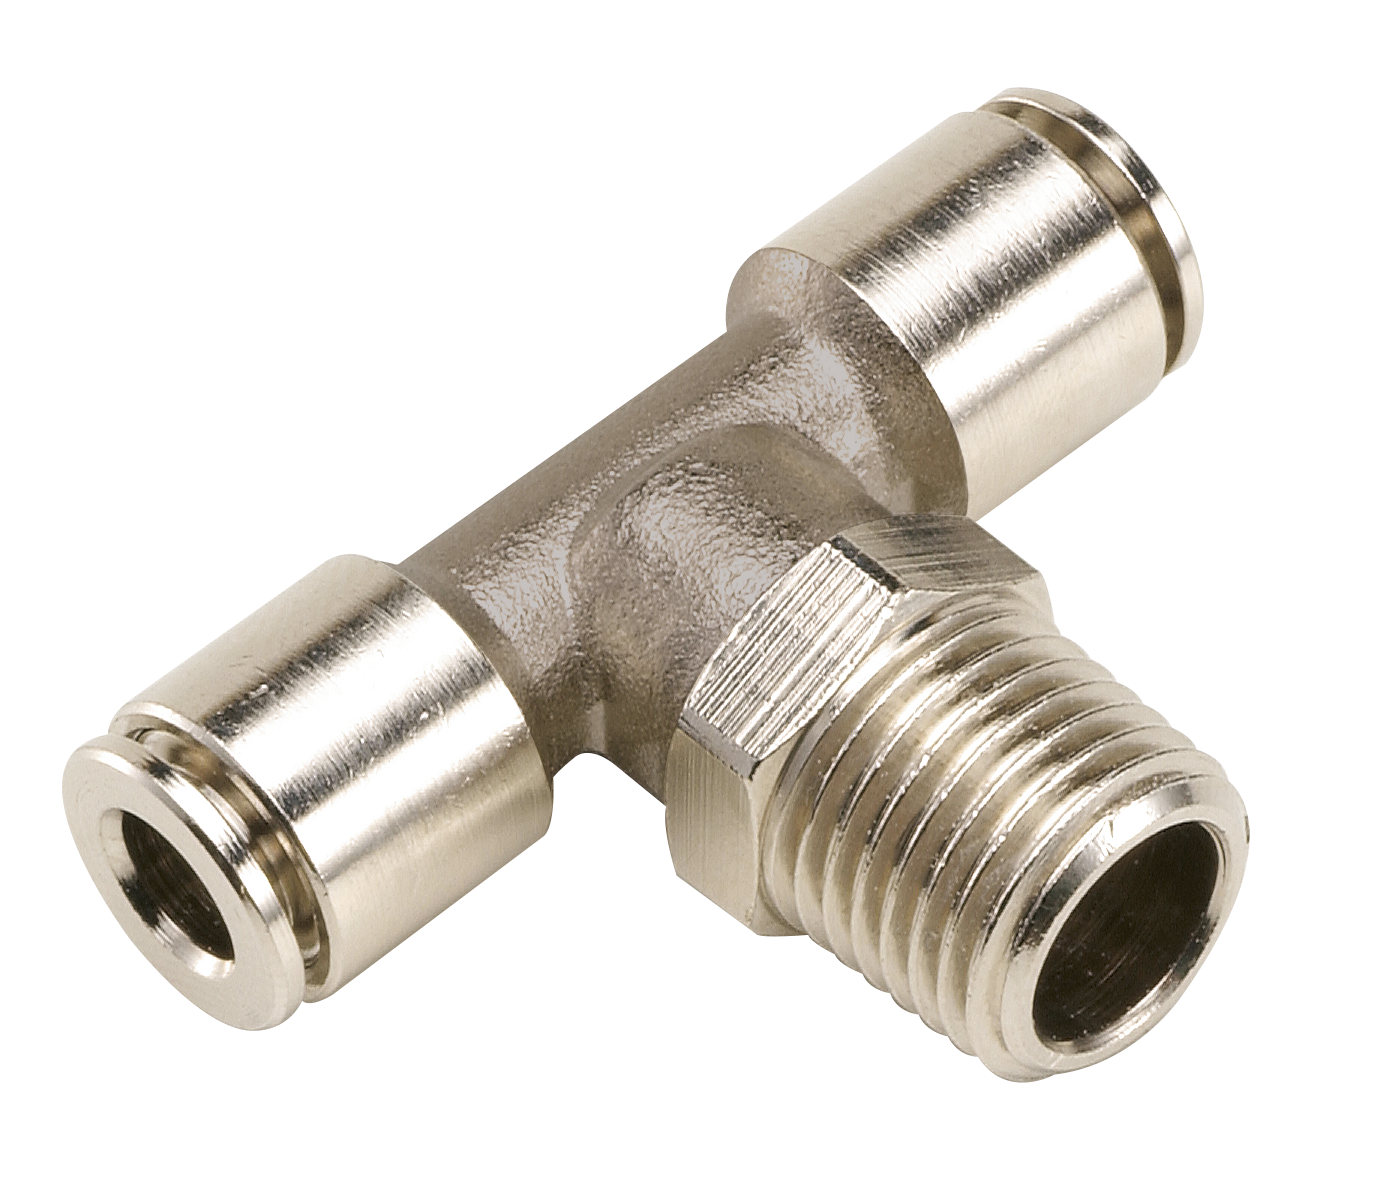 Implantation’s fittings SWIVEL CENTRAL BRANCH T MALE FITTING, TAPER